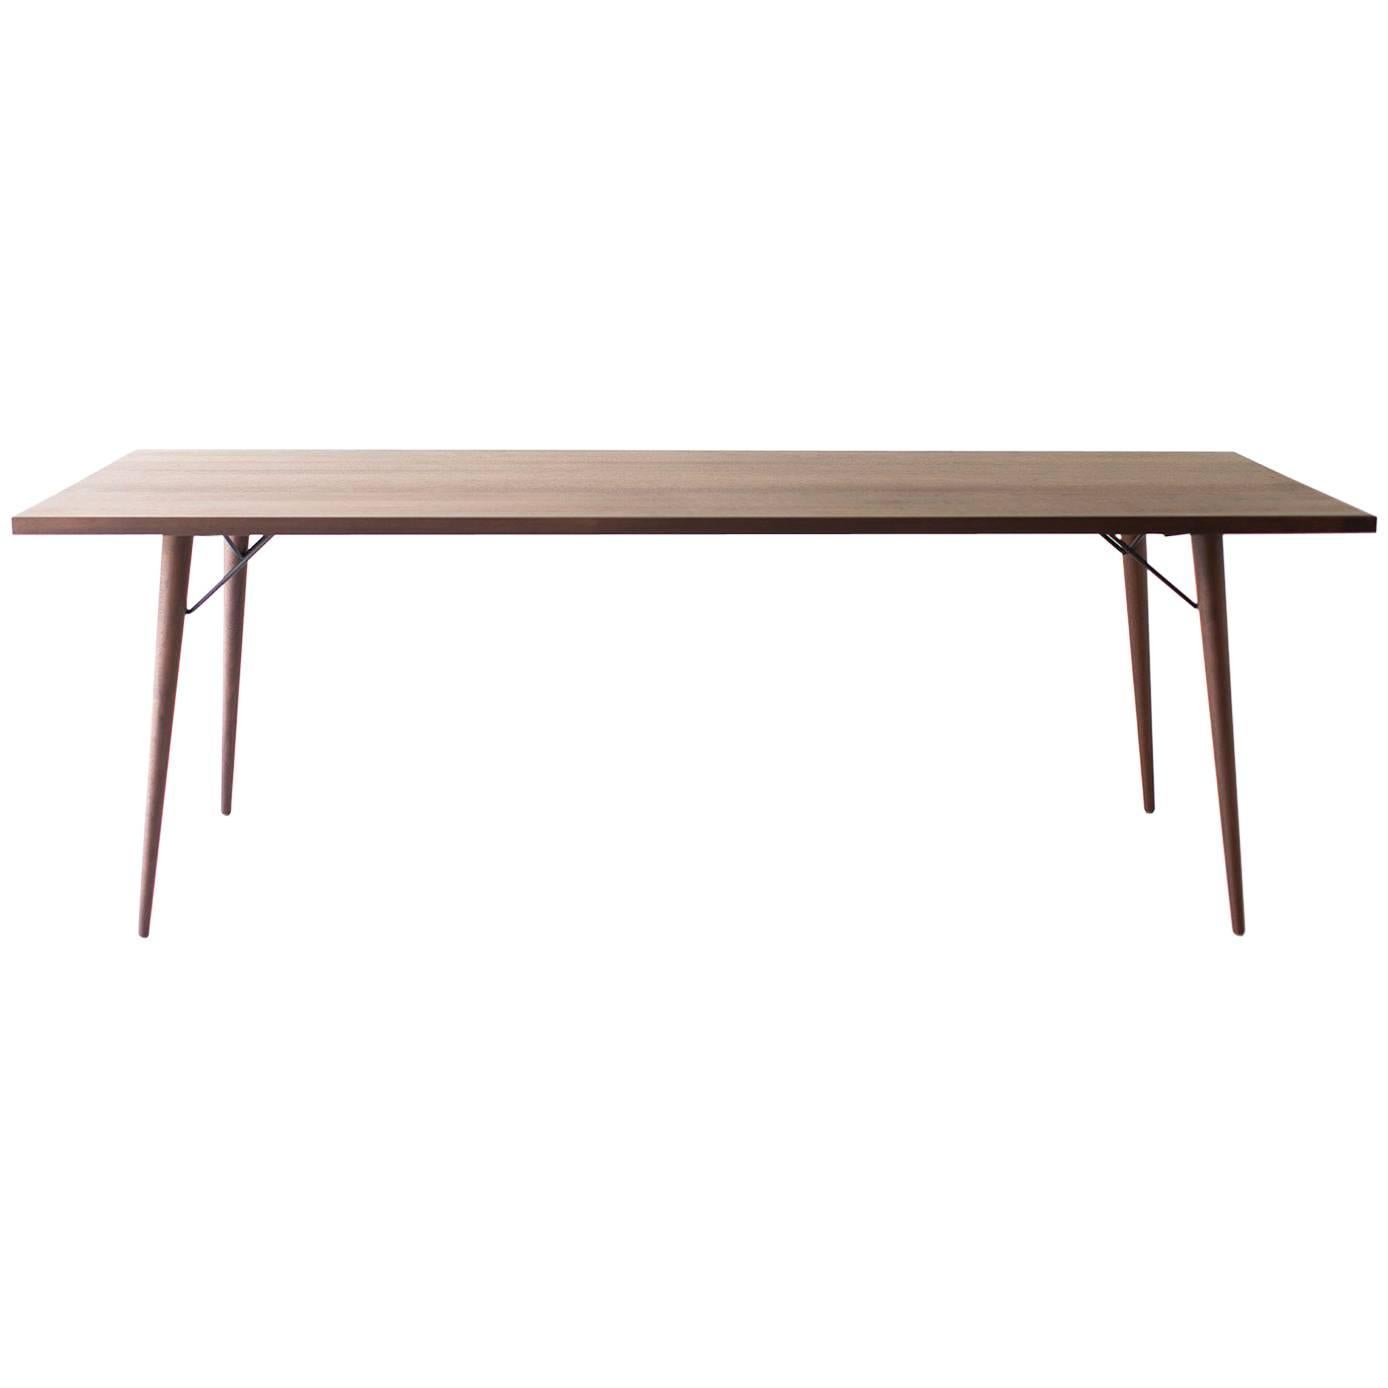 Modern Dining Table, "The New York Table"